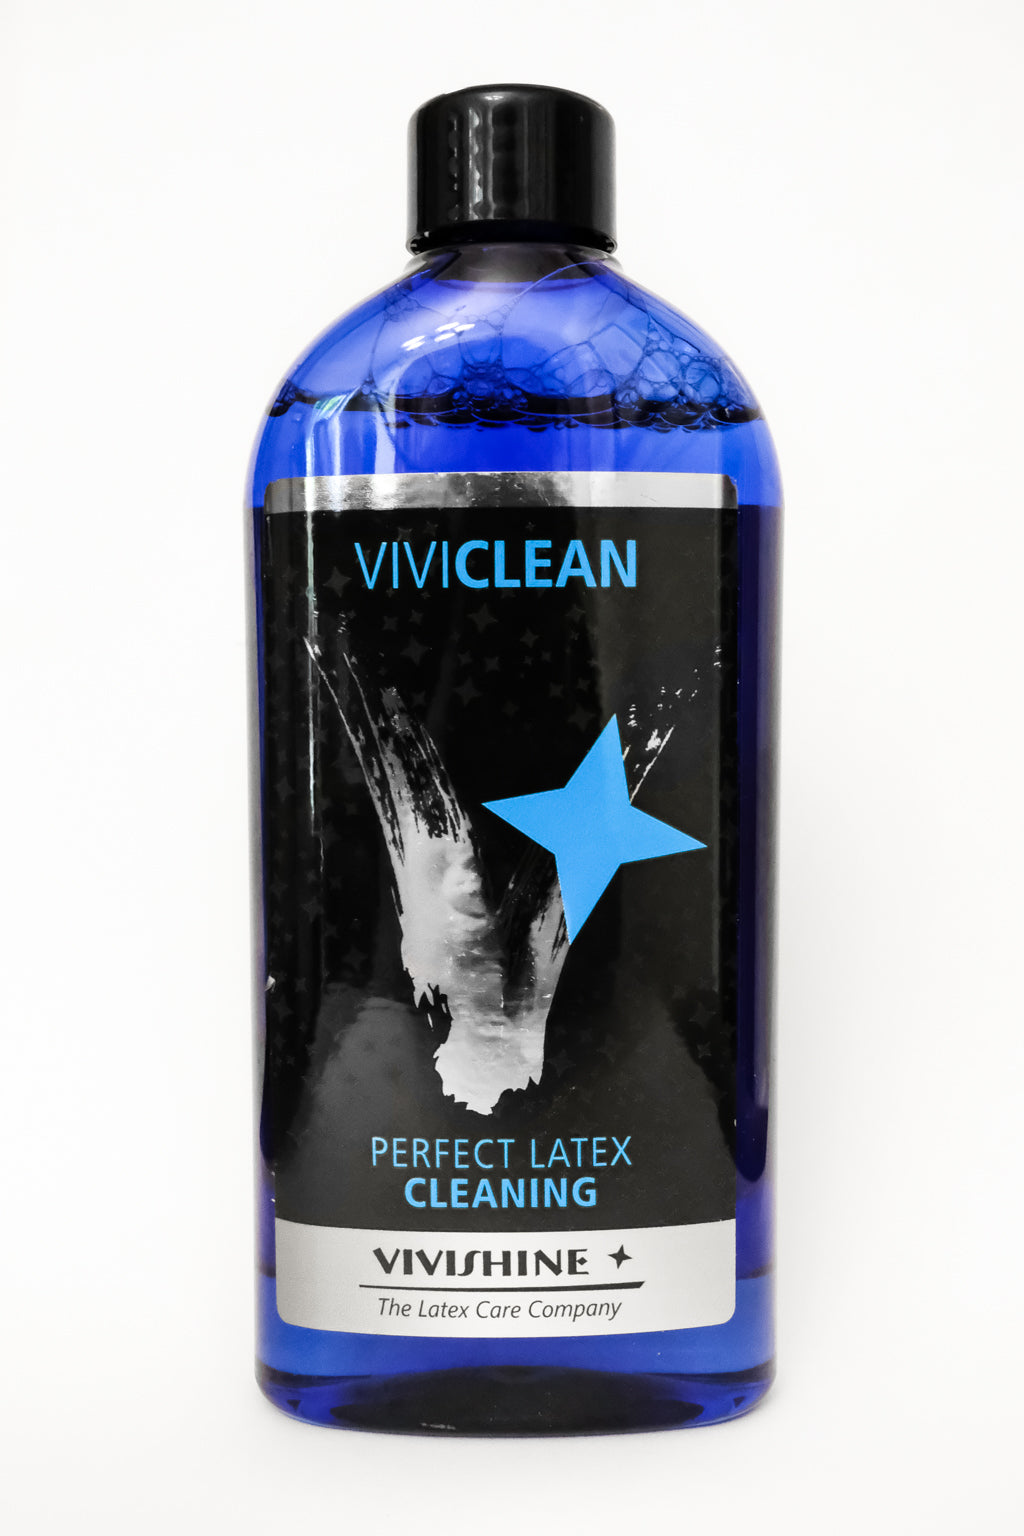 A bottle of ViviClean, a latex clothing cleaning product.